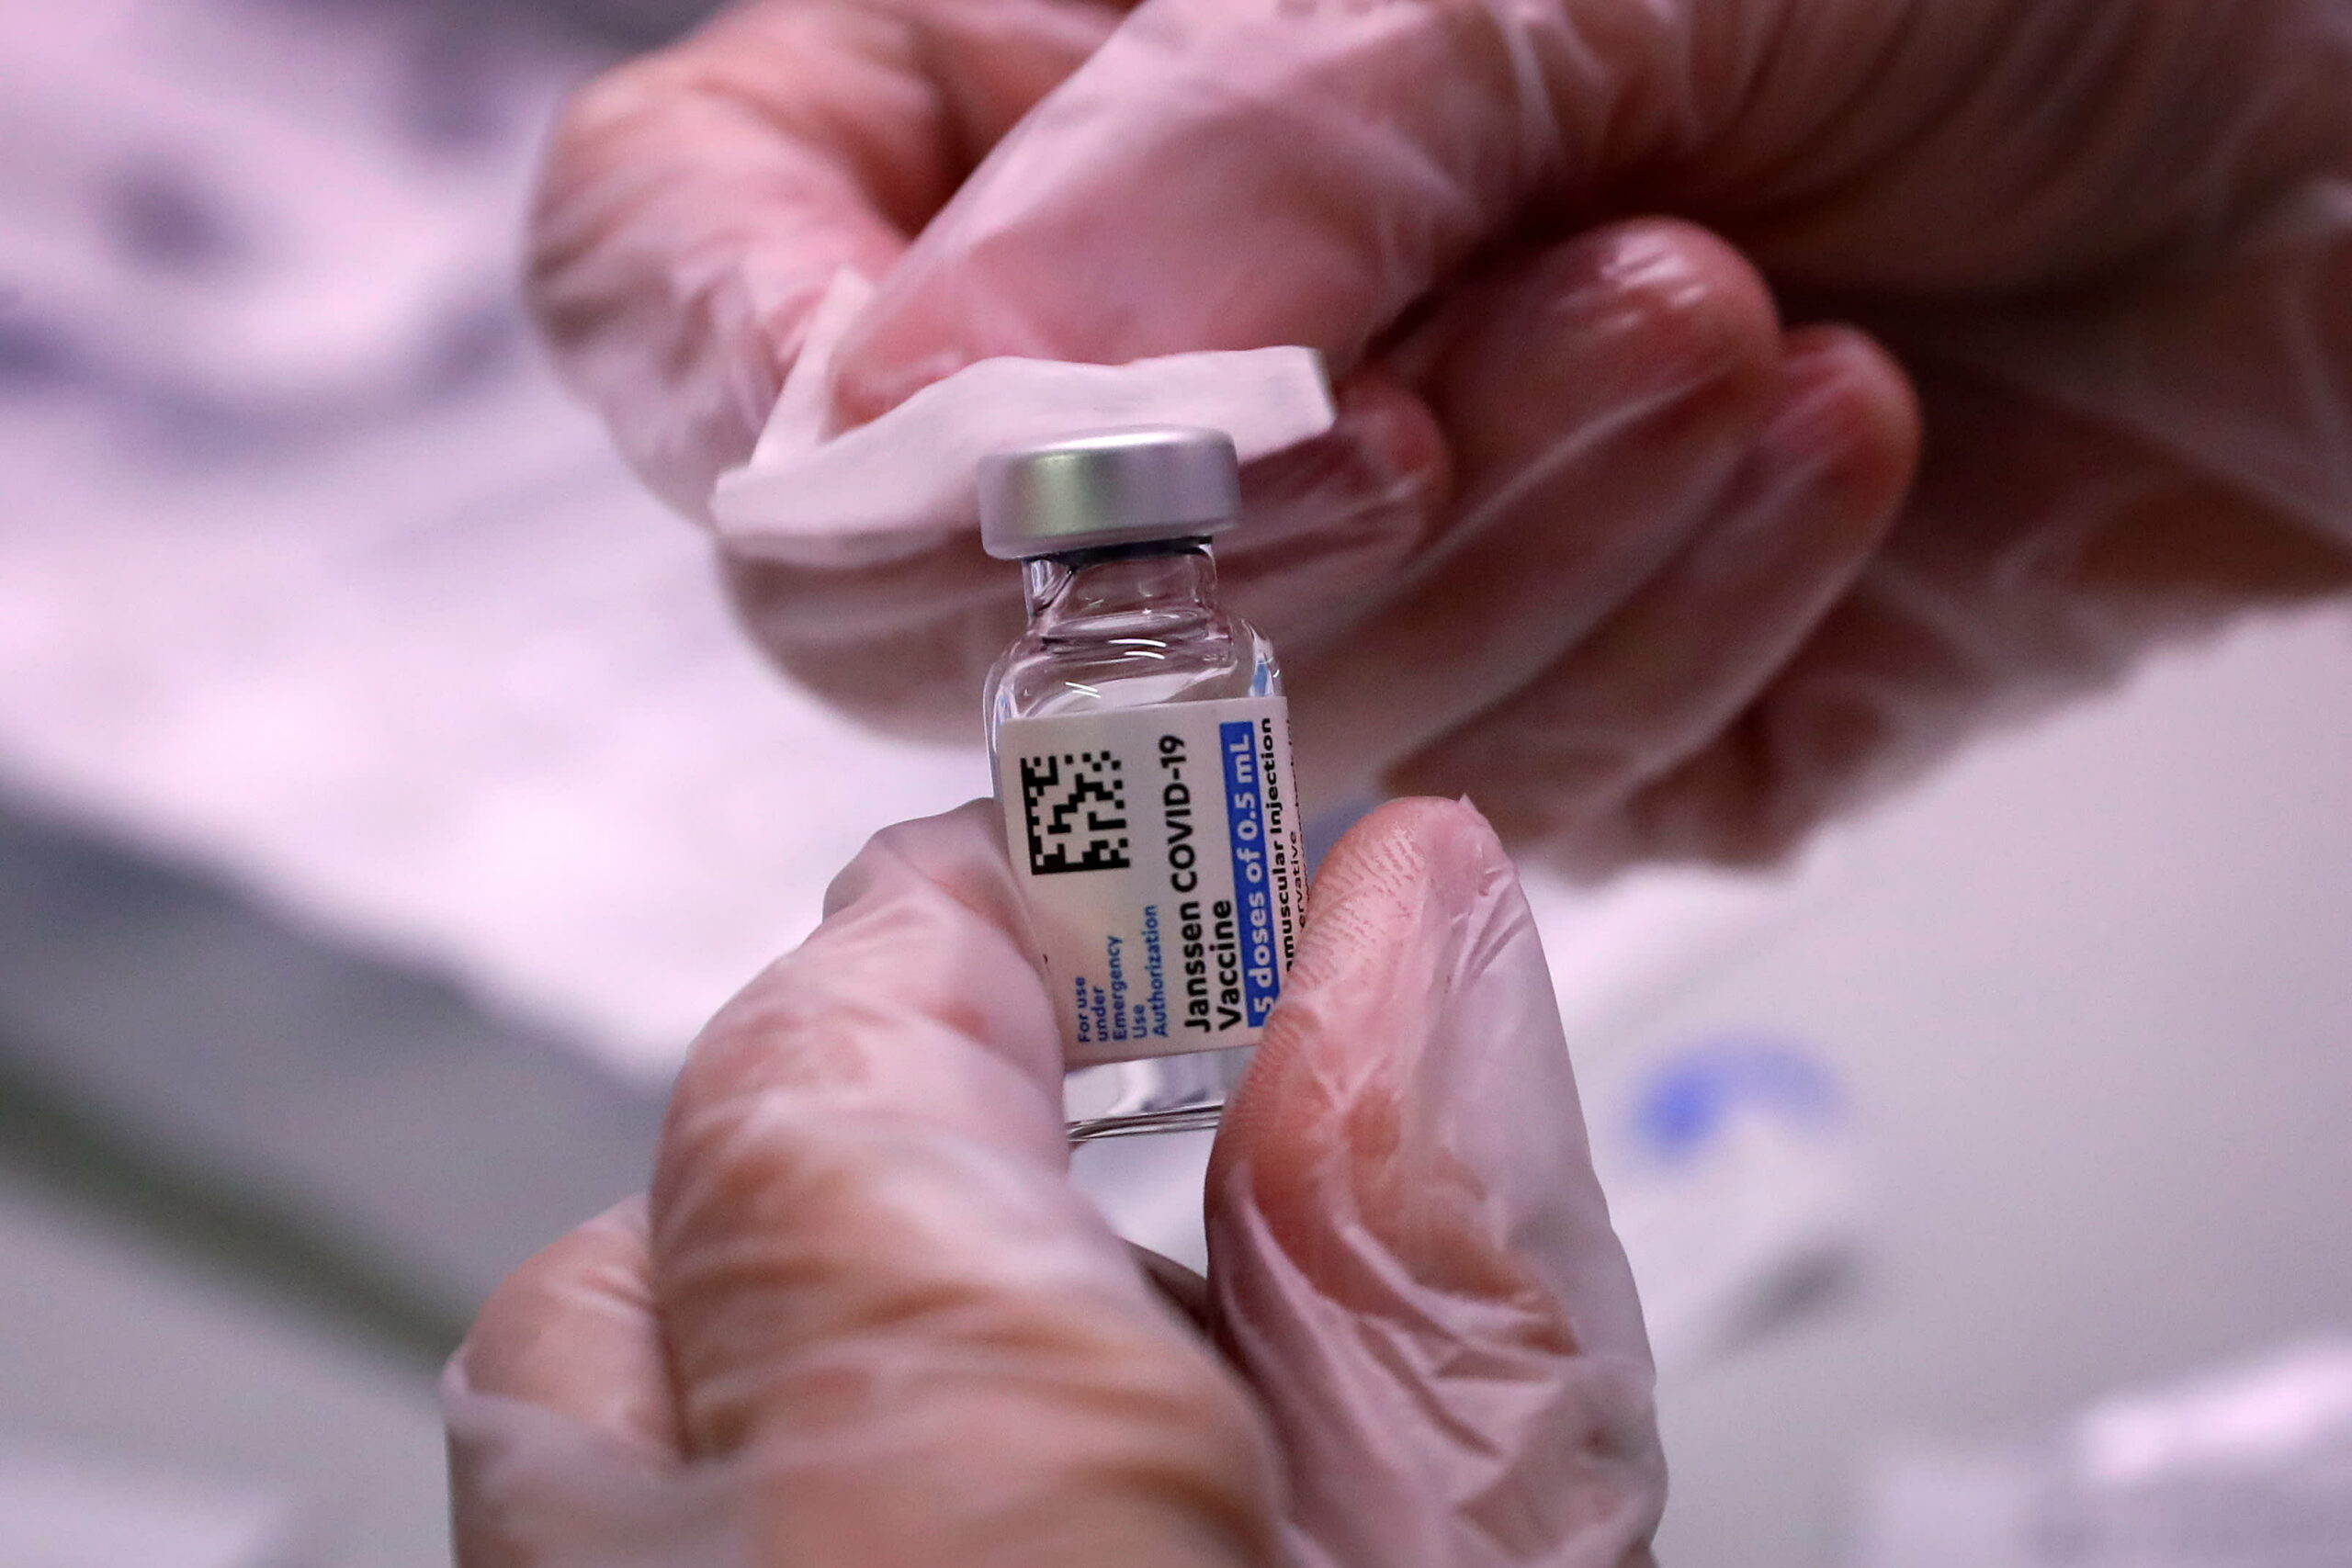 U.S. begins research testing mix-and-match Covid vaccine doses